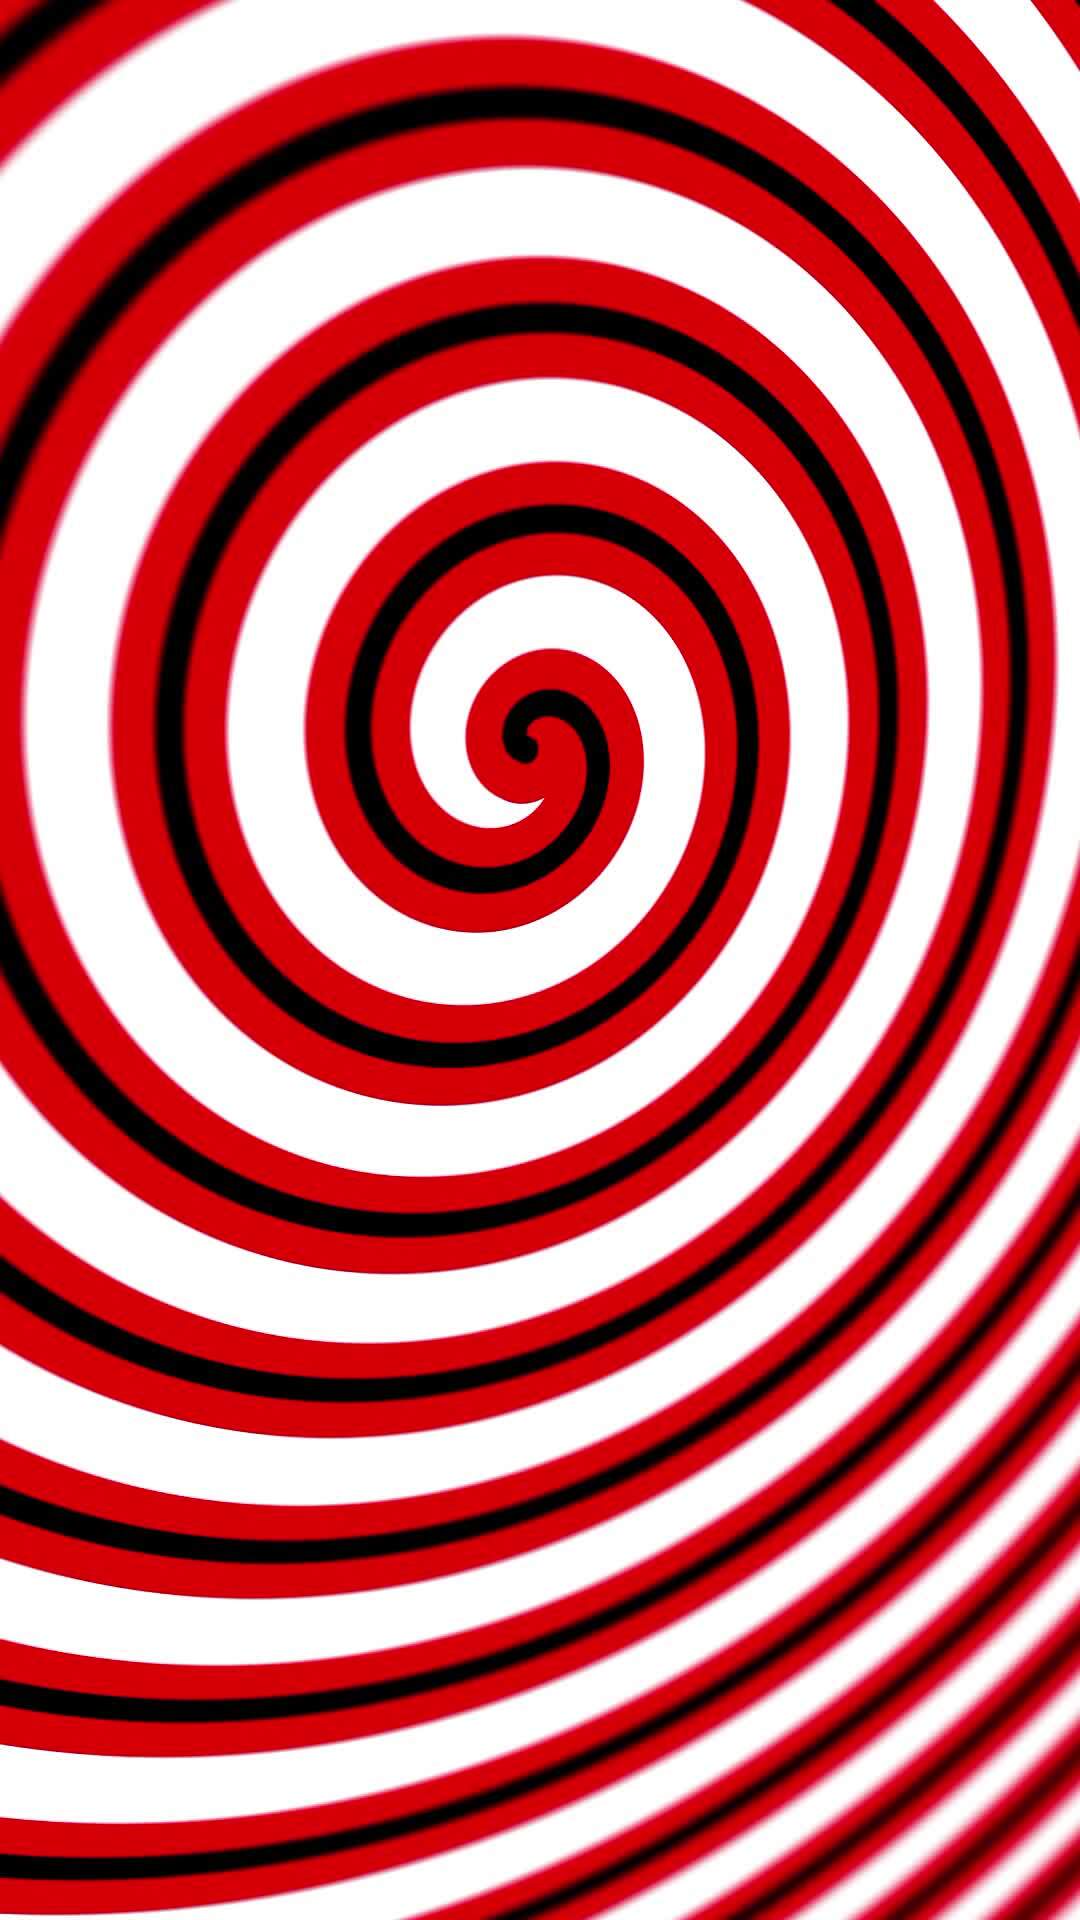 Vertical video - hypnotic colorful circus spiral motion background